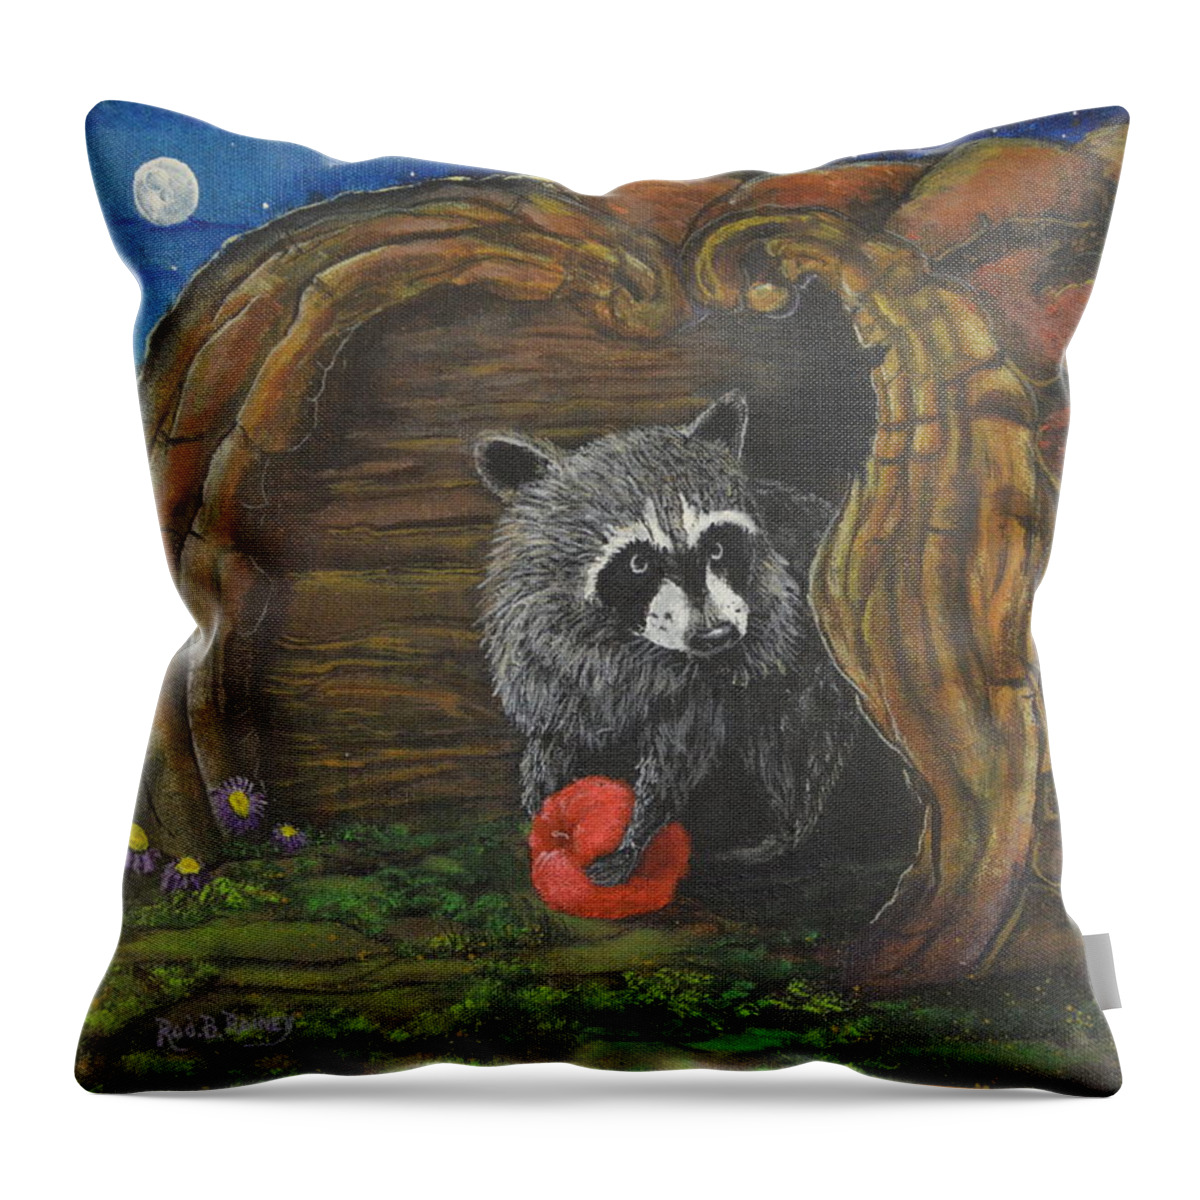 Raccoon Throw Pillow featuring the painting Laying Low by Rod B Rainey